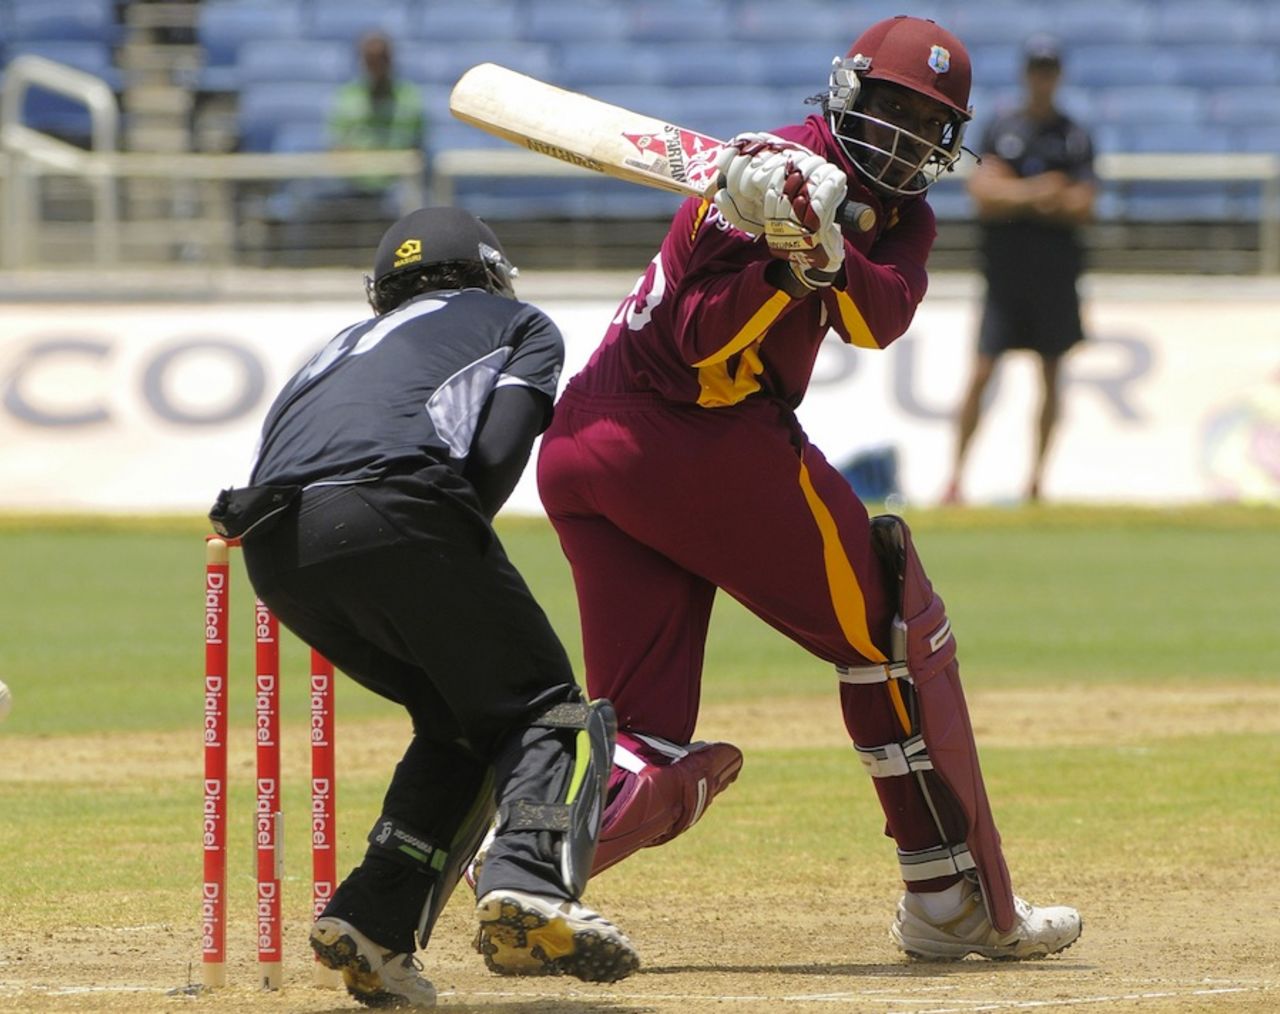 Chris Gayle hits a boundary to get to his 20th ODI century, West Indies v New Zealand, 2nd ODI, Kingston, July 7, 2012